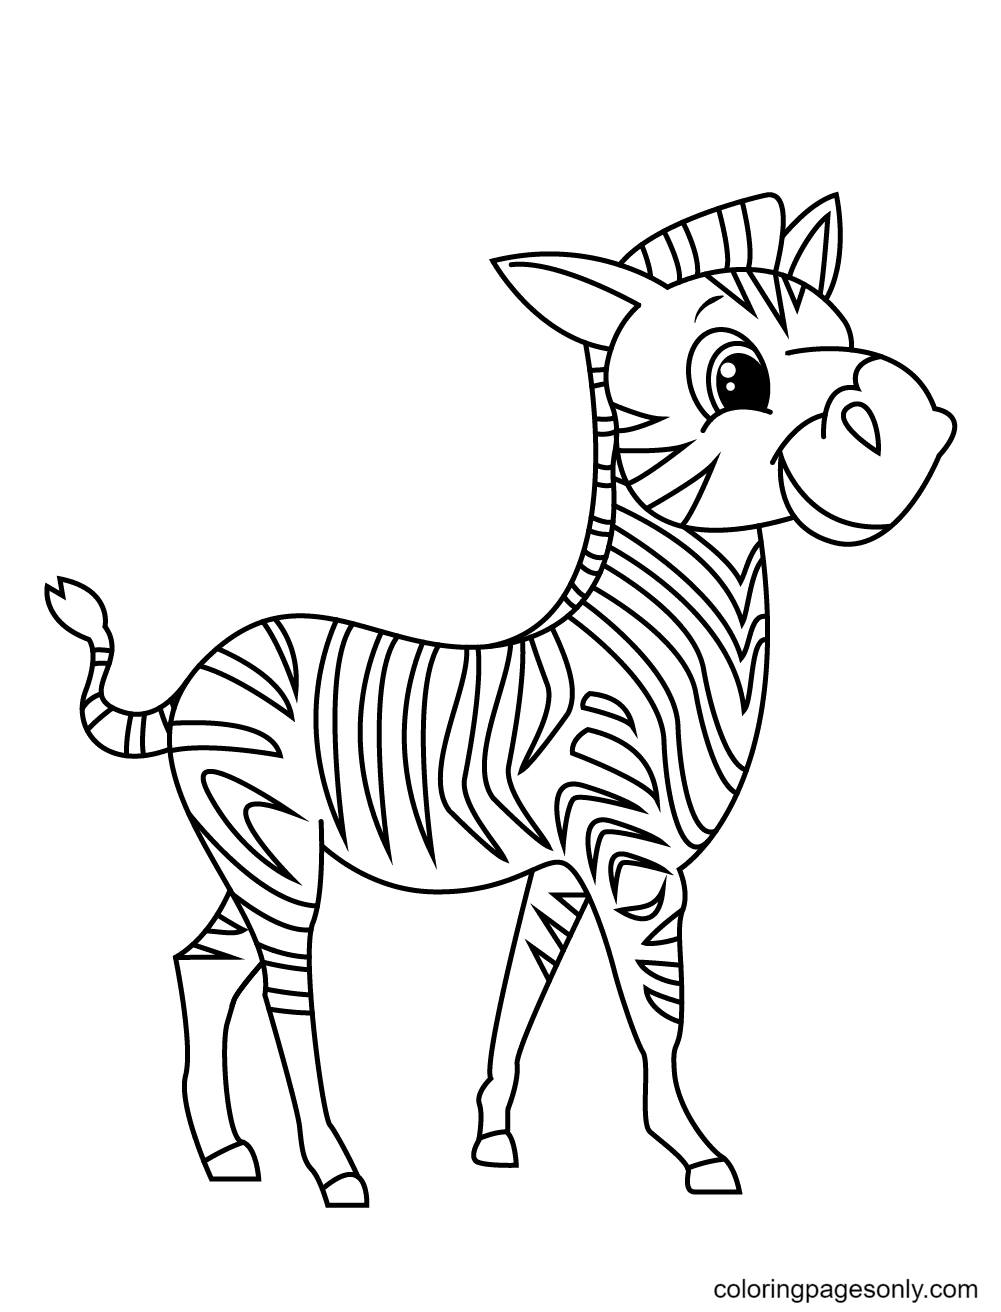 A Cute Zebra Looking Very Proud Coloring Page